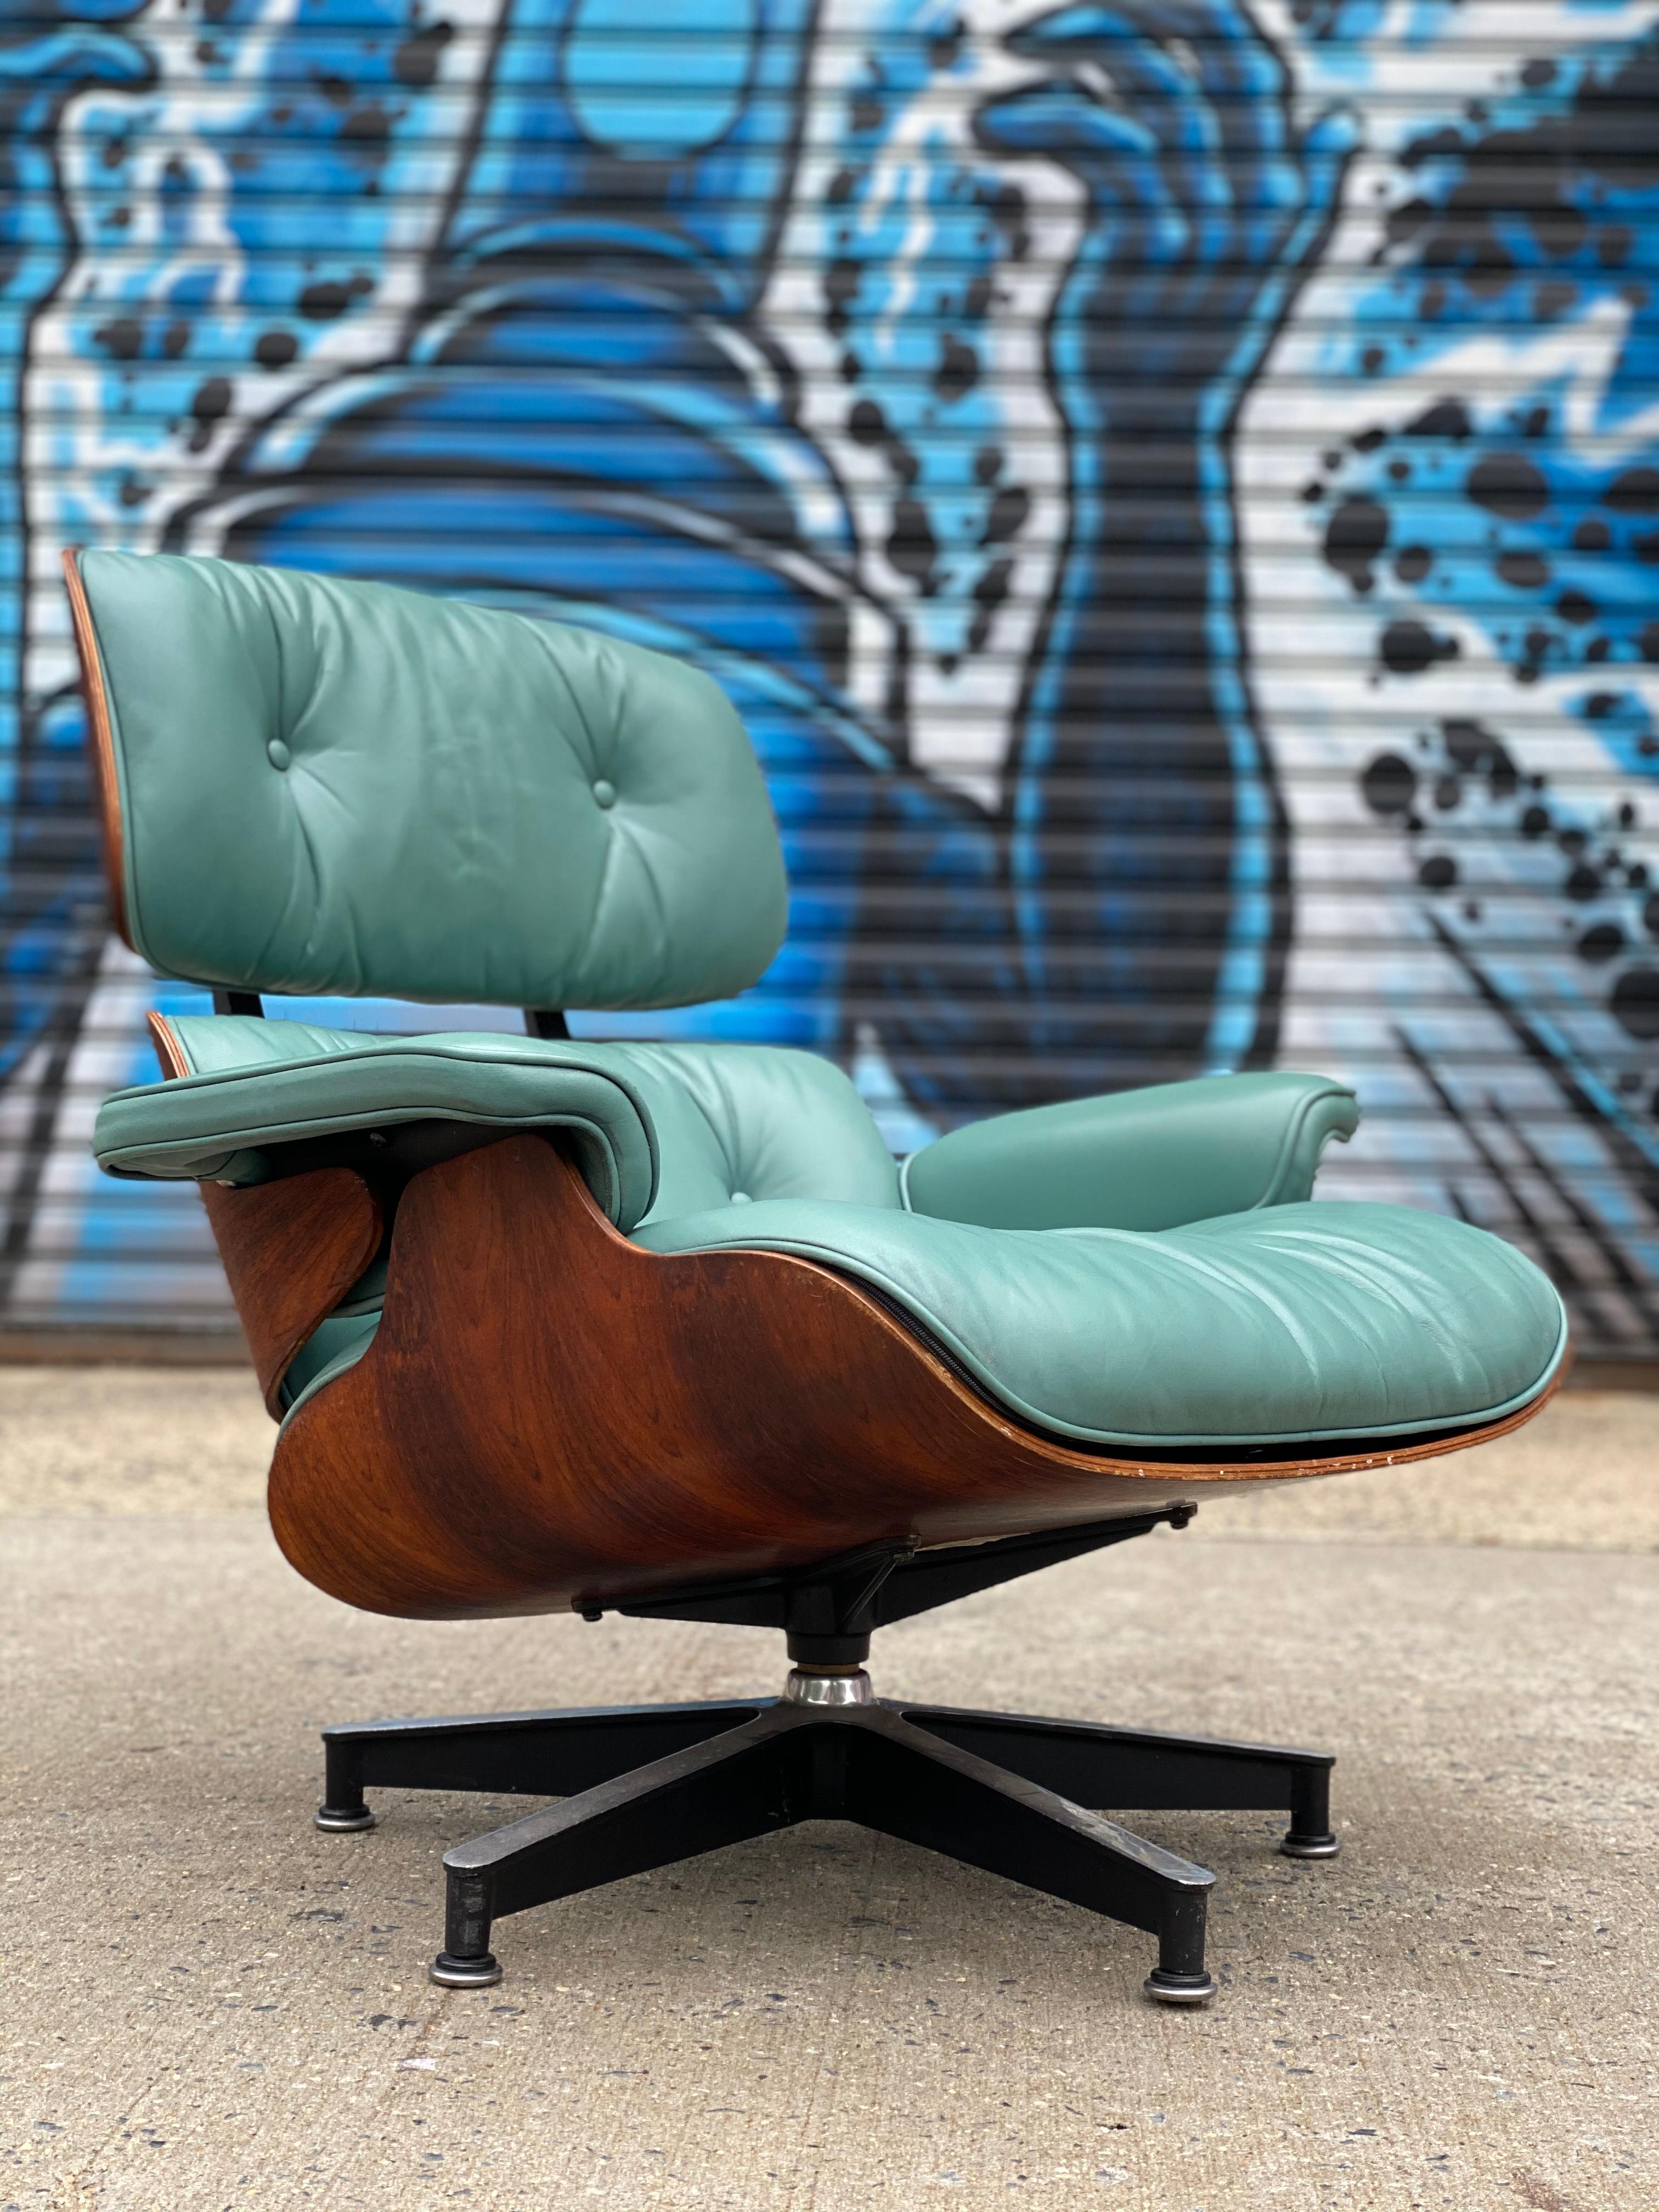 Incredibly vibrant and elegant edition of the classic Herman Miller Eames lounge chair and ottoman, circa 1960/1970s chair with original Herman Miller label. Custom leather cushions in superb condition. This blue green is not a color we have ever